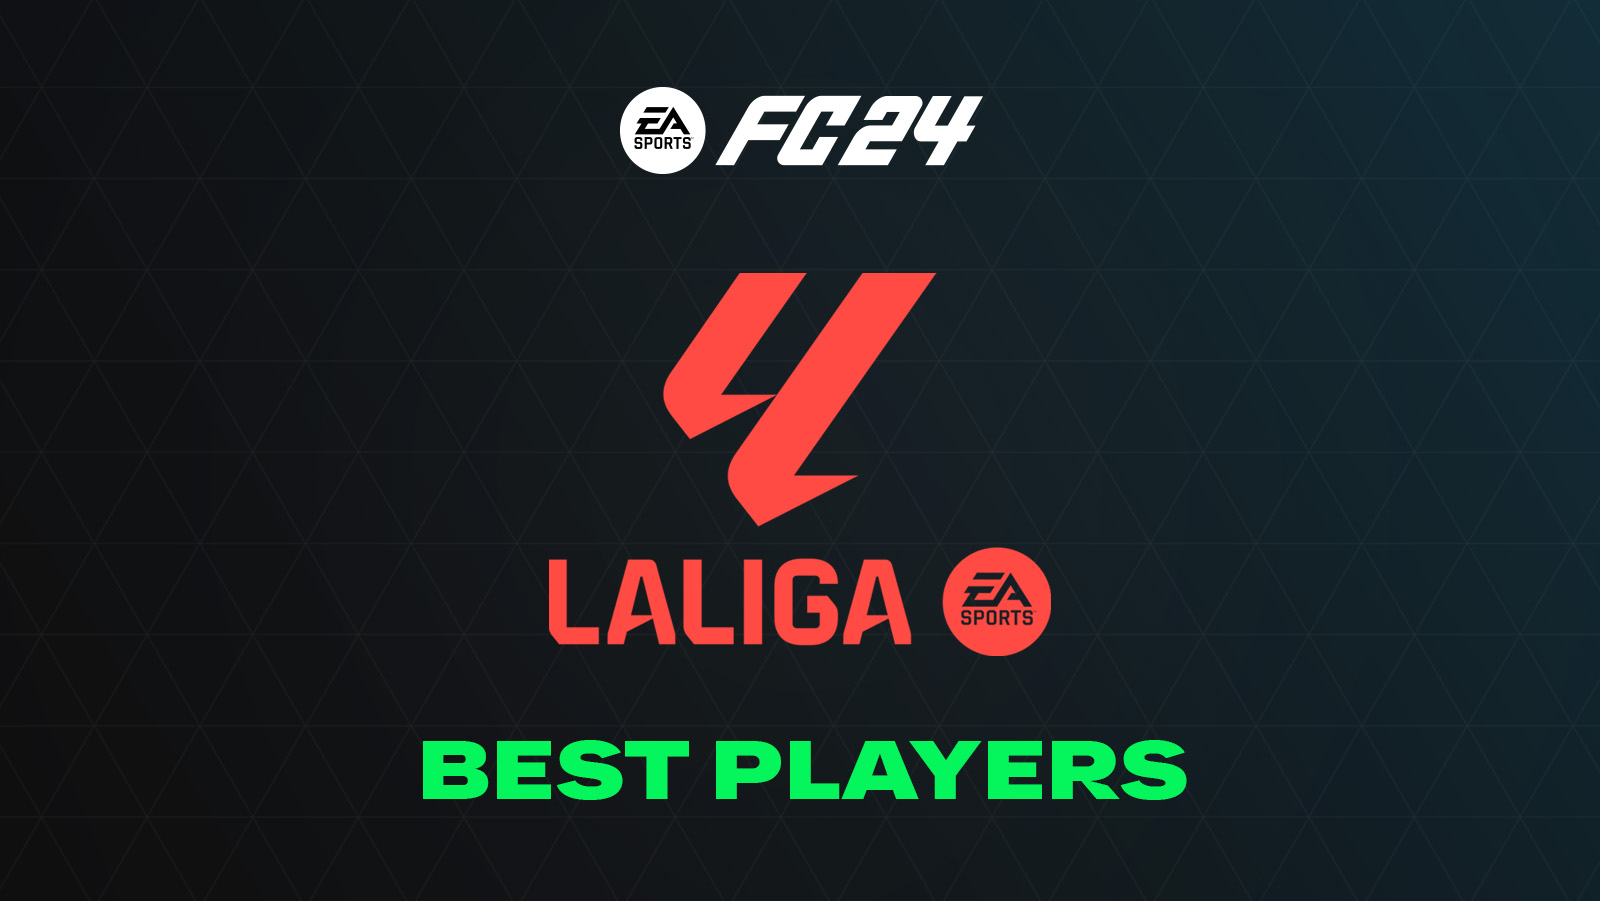 FC 24 Top Players from La Liga